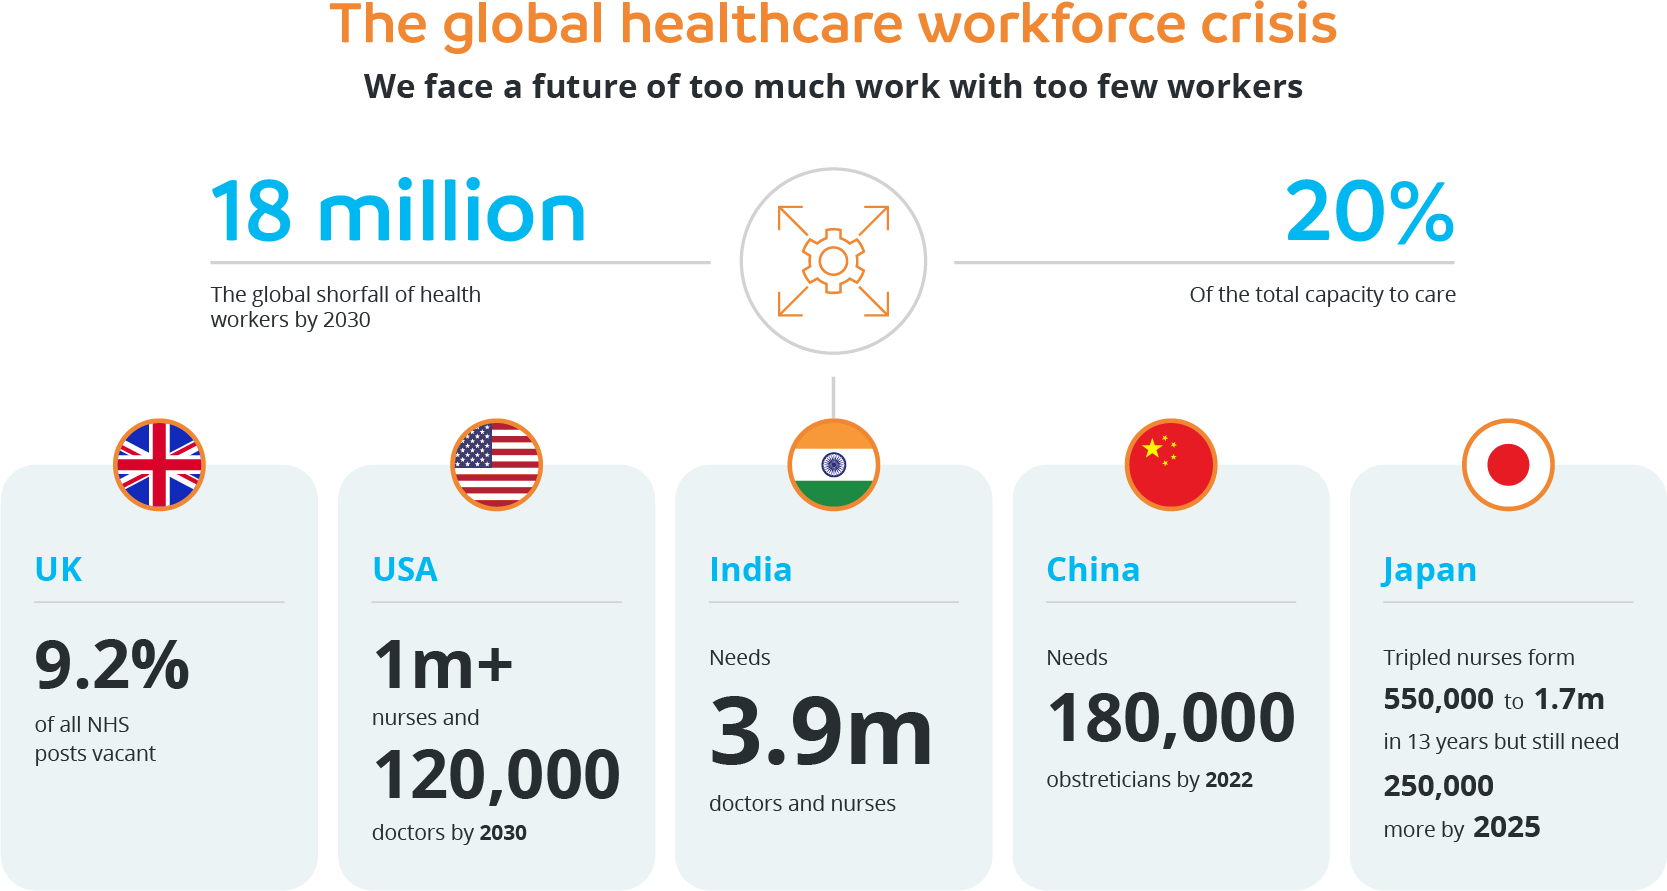 The global healthcare workforce crisis